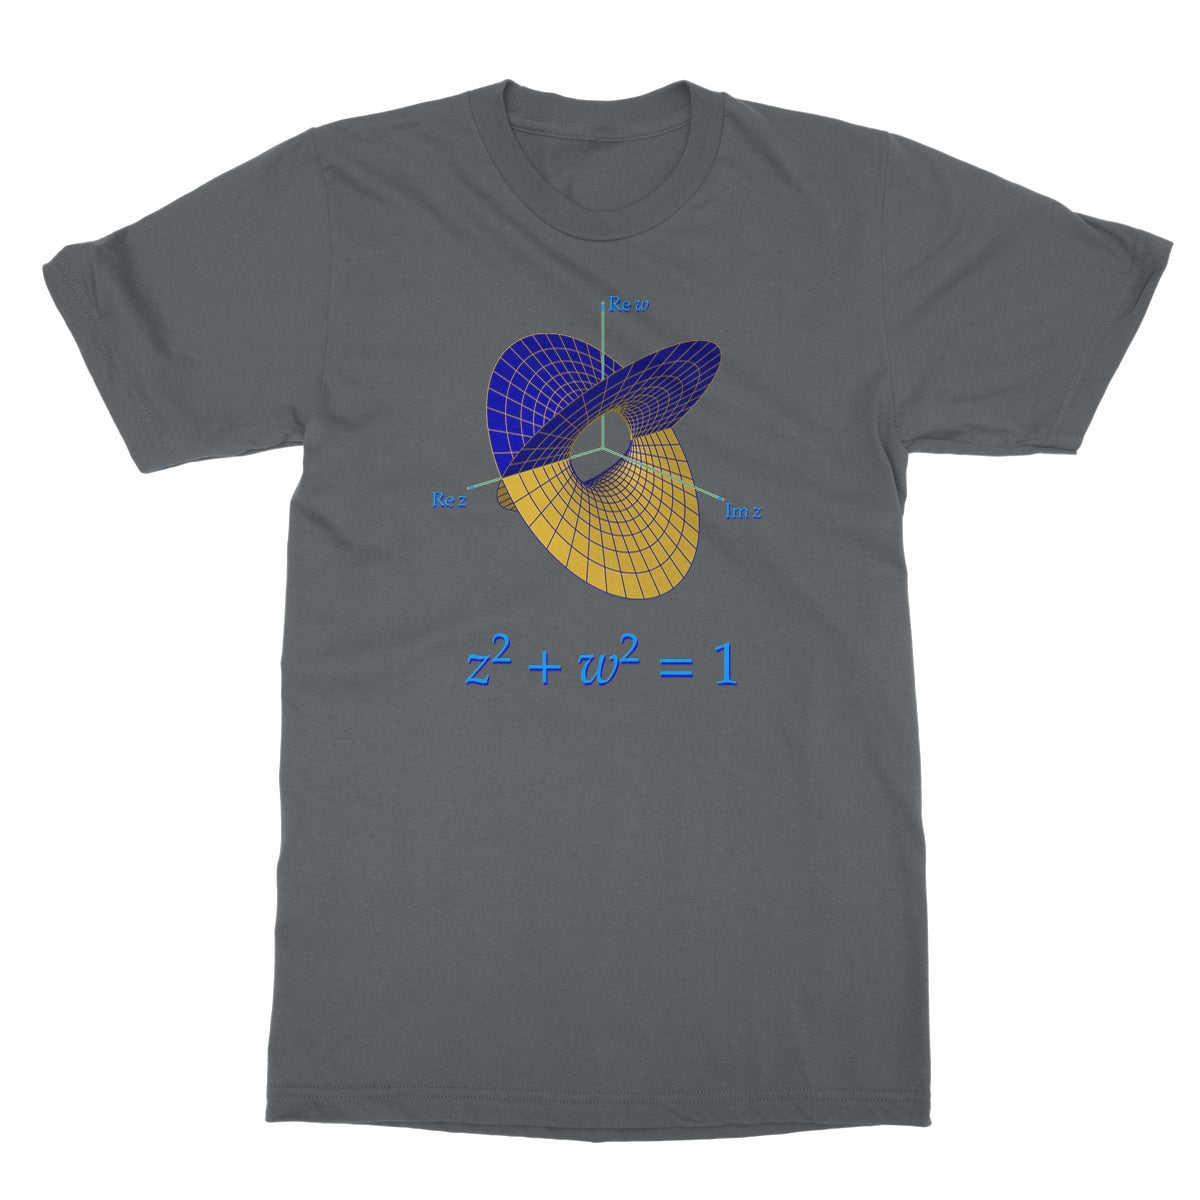 A gray softstyle T-shirt with a blue and gold image of the complex unit circle